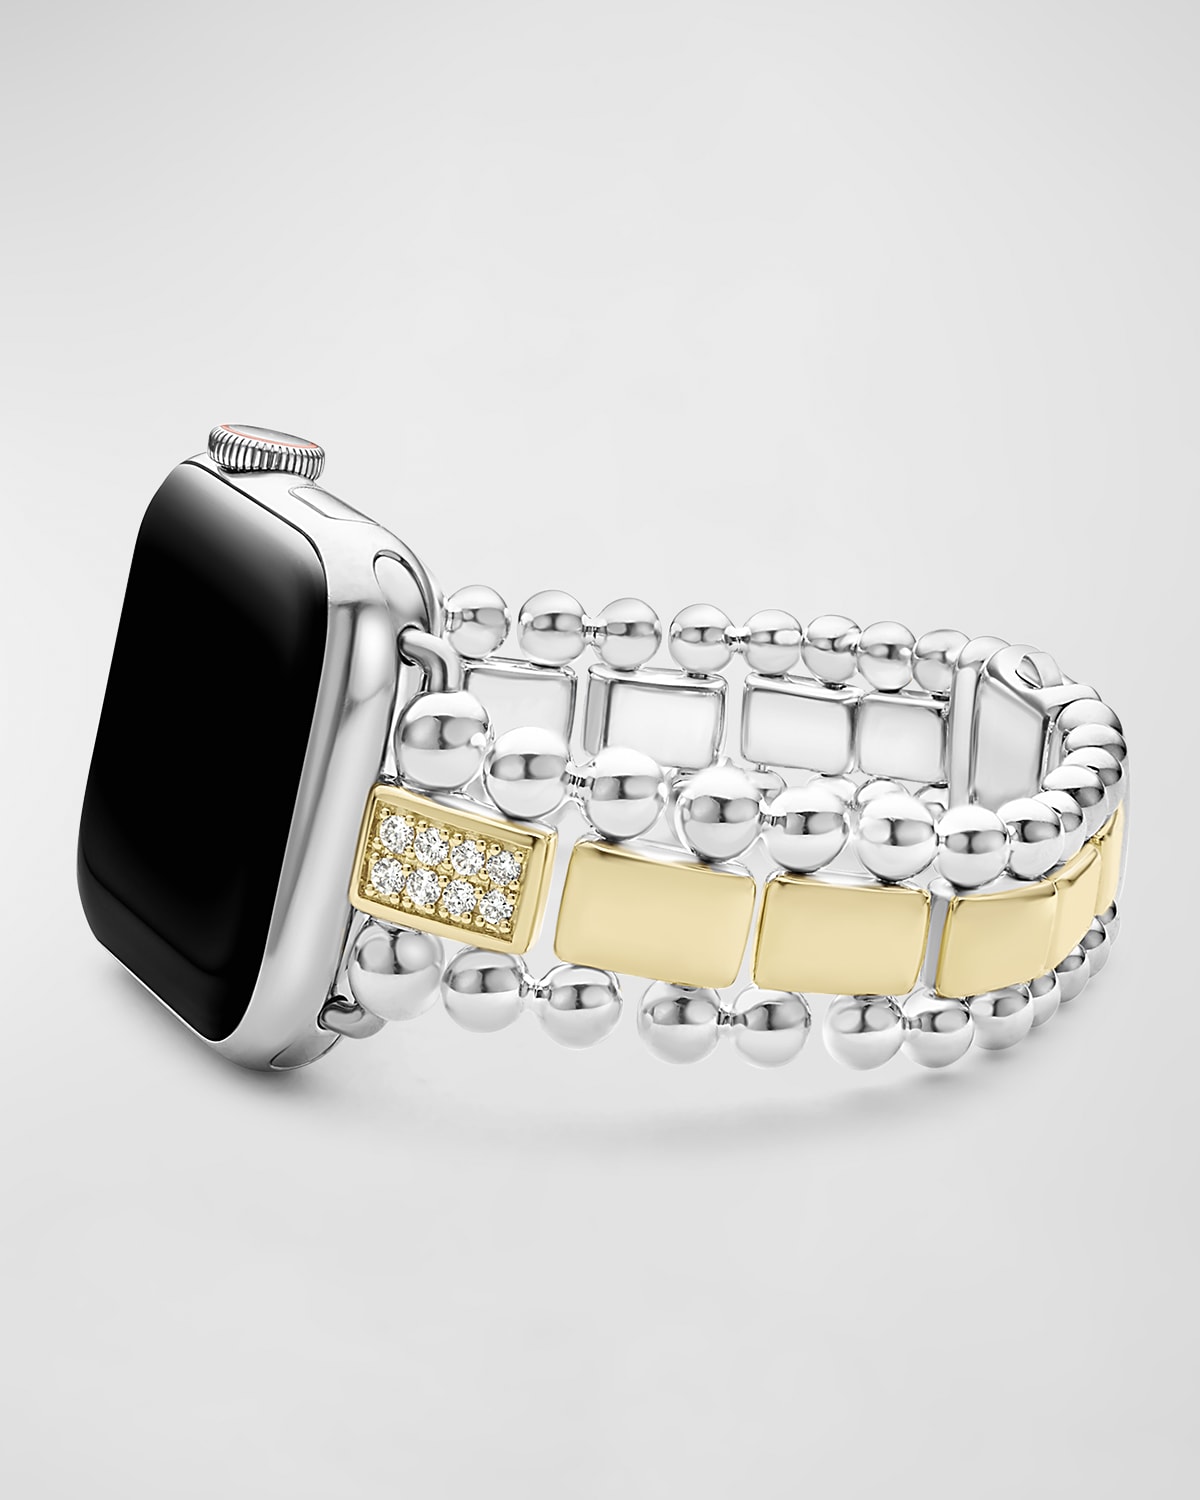 Smart Caviar Two-Tone Sterling Silver and 18k Yellow Gold Diamond 2-Link Apple Watch Bracelet, 38-45mm